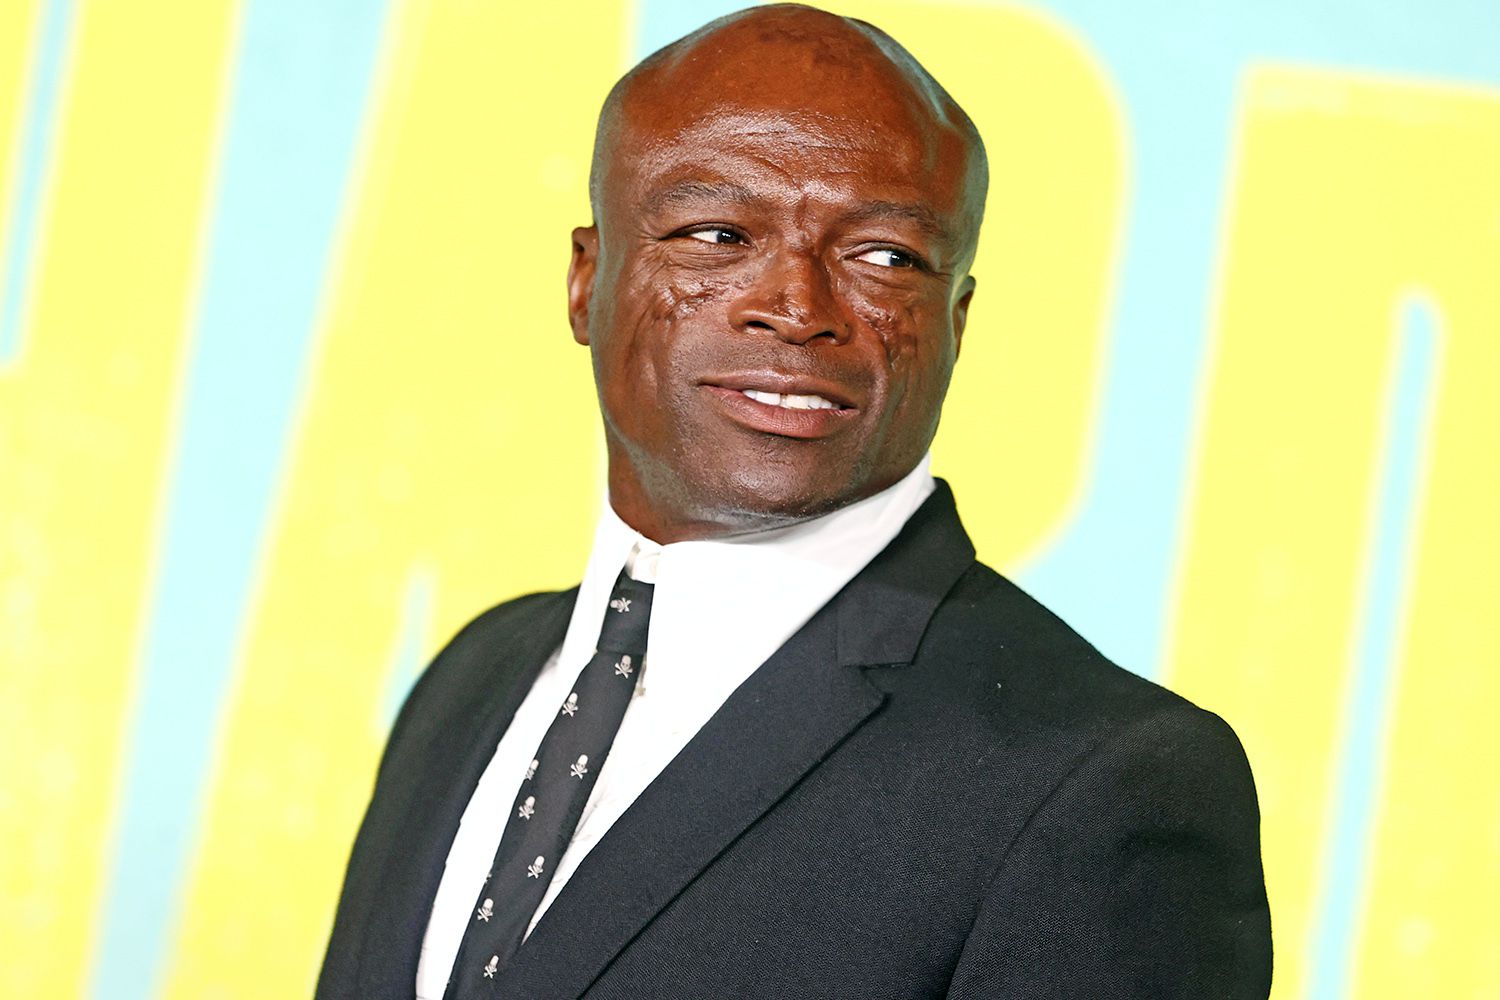 How Old Is Seal, The Singer